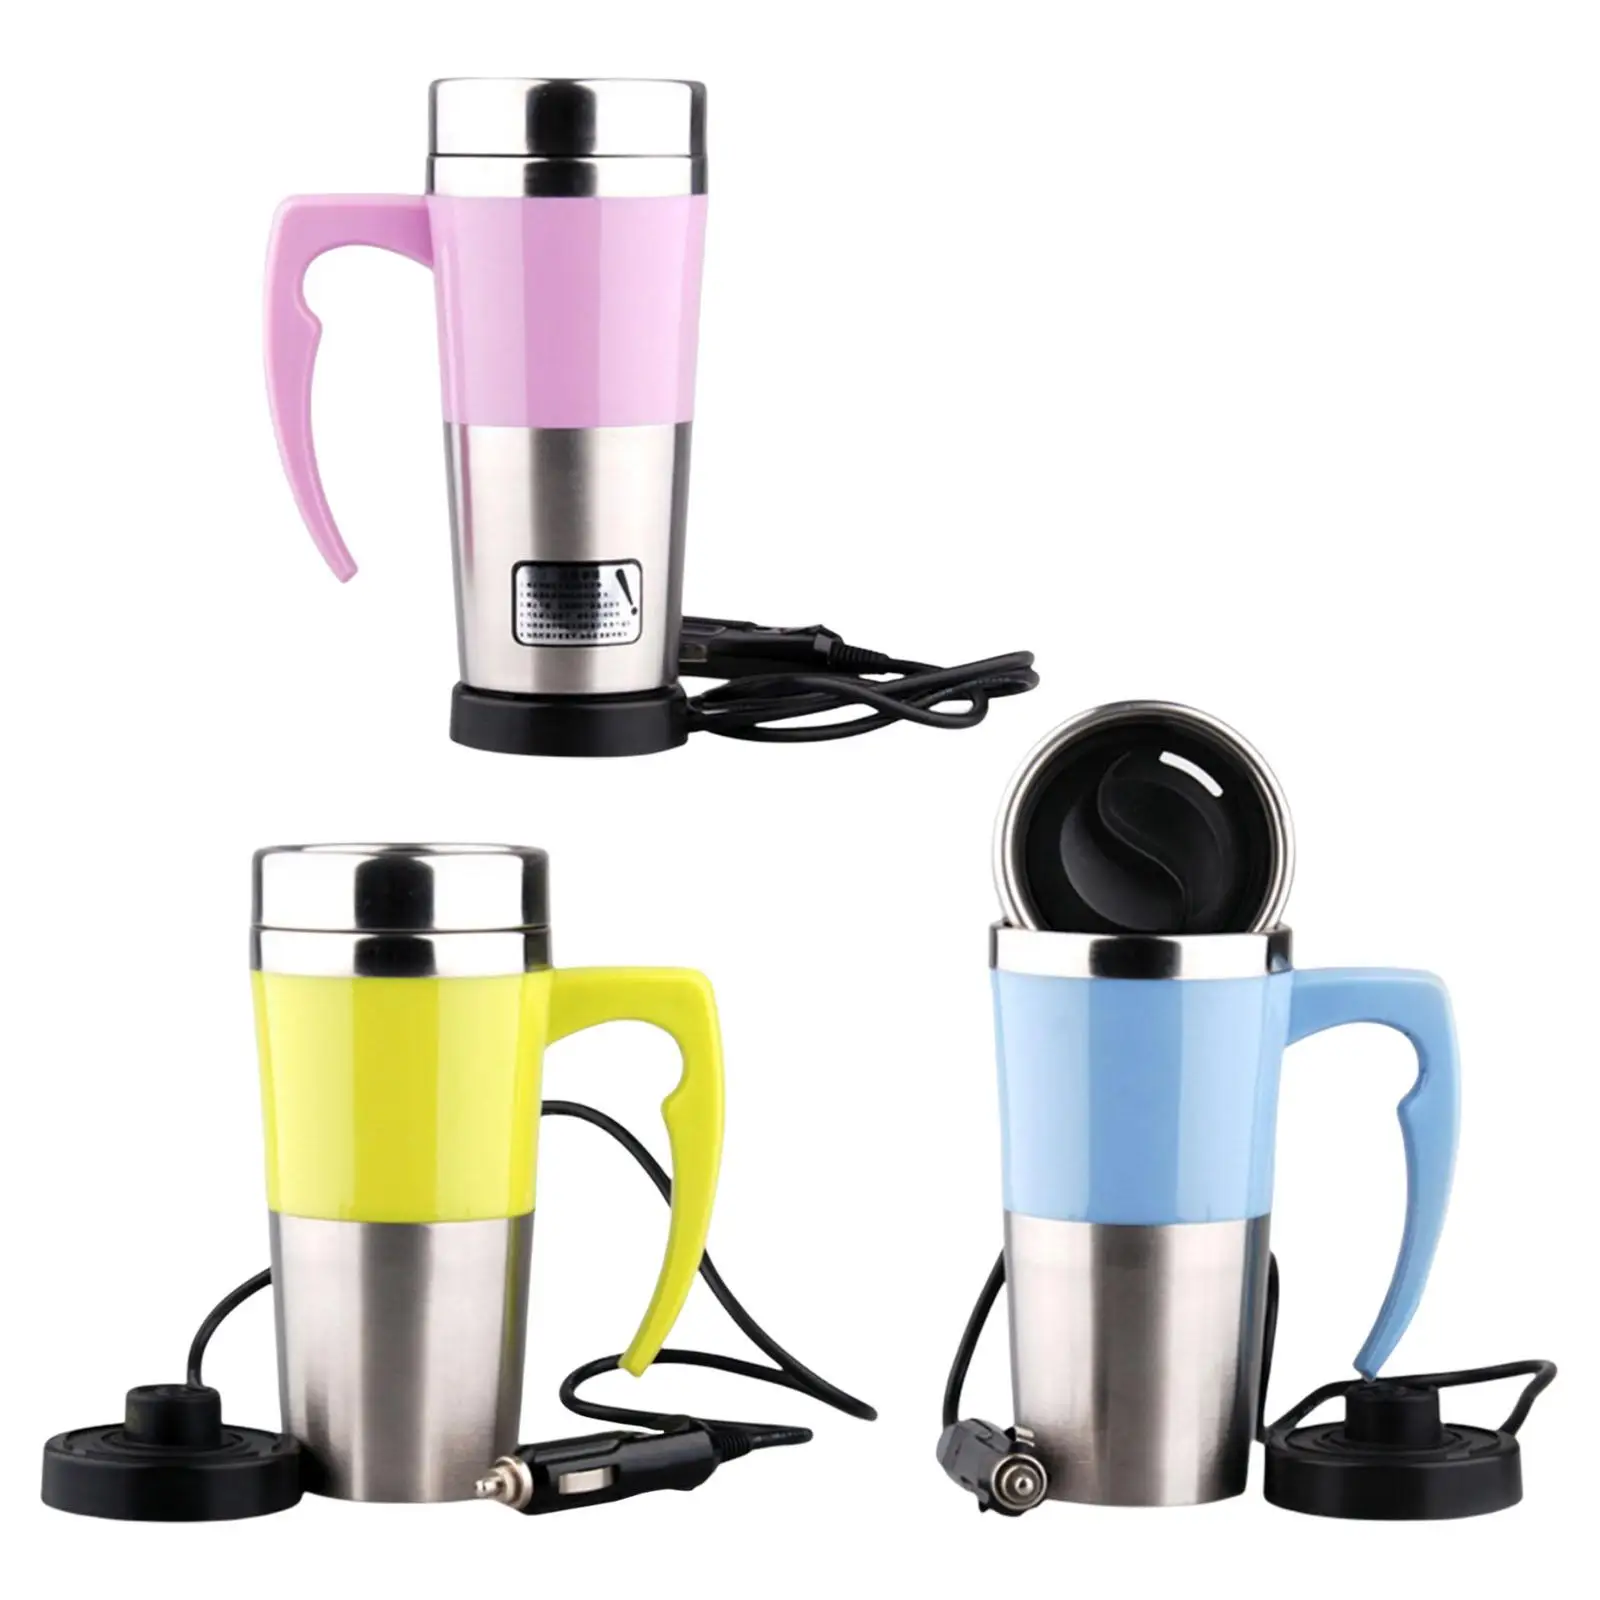 Car Electric Kettle 12V 350ml Electric In-Car Stainless Steel Portable Car Water Heater Mug Fit for Tea Hot Water Camping Boat